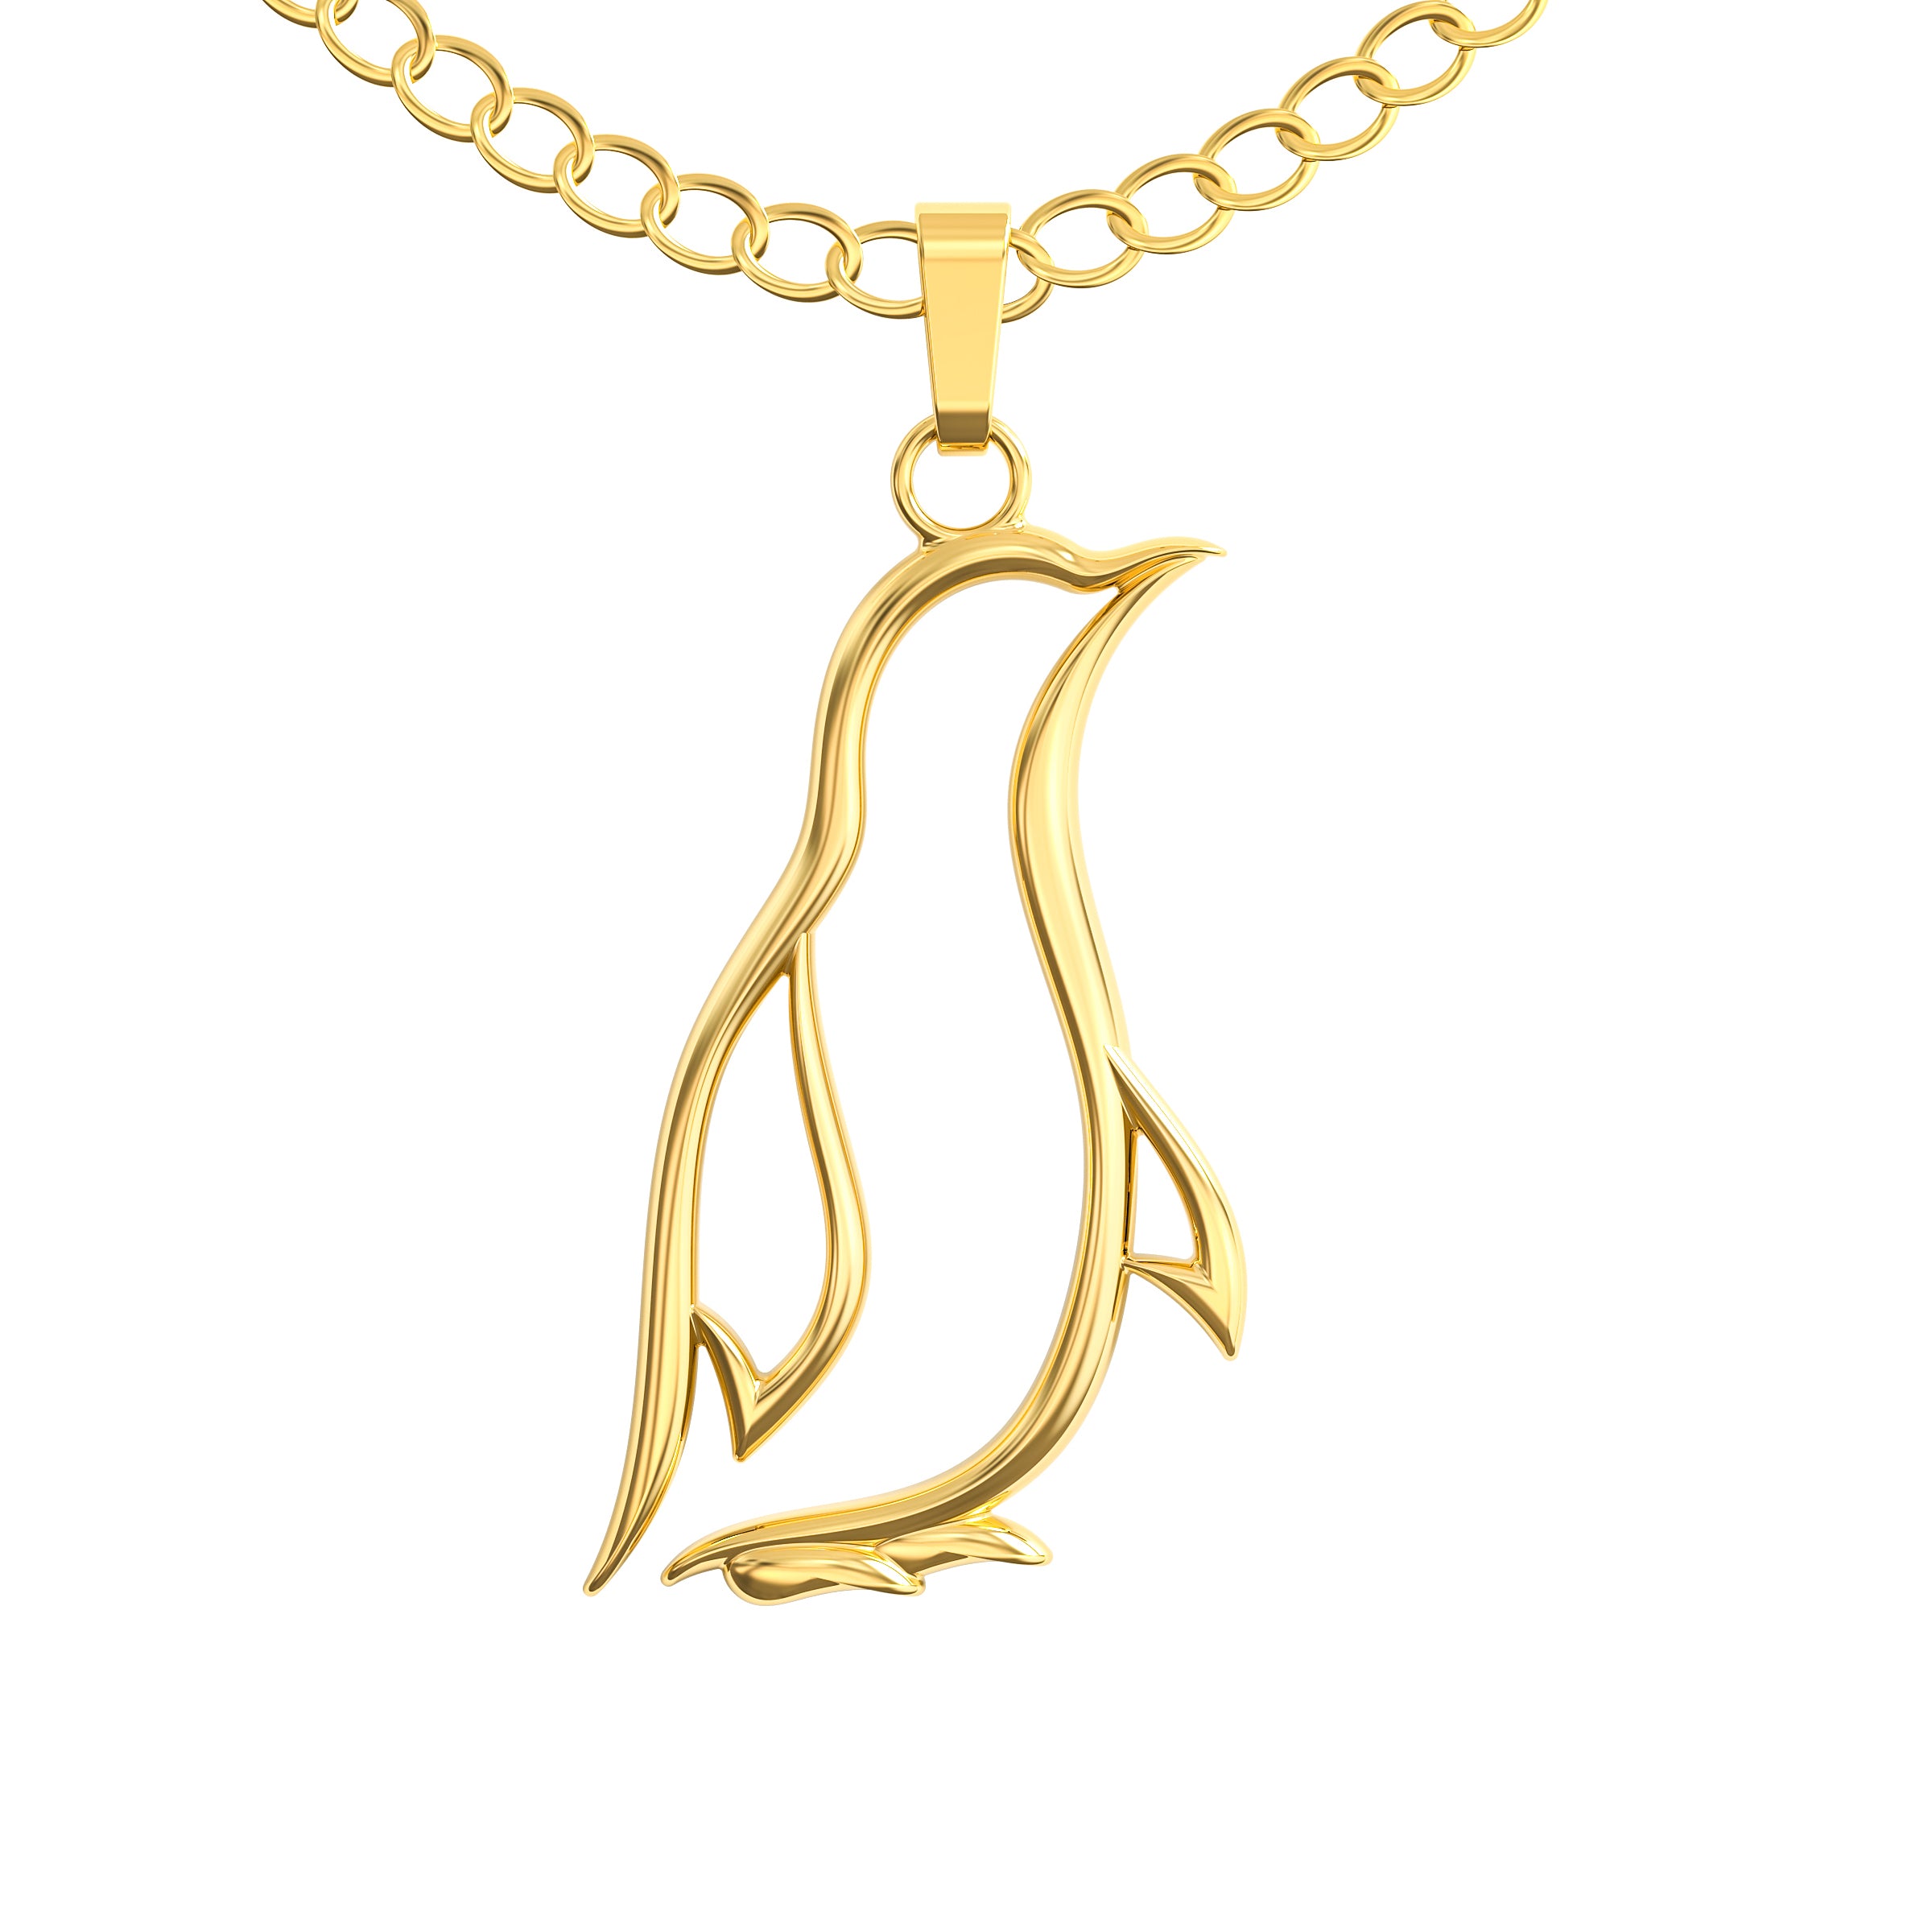 Vintage Penguin Charm, 9 Carat Yellow Gold 1960s Bird Charm on 45.5 cm / 18  inch Gold Chain. - Addy's Vintage